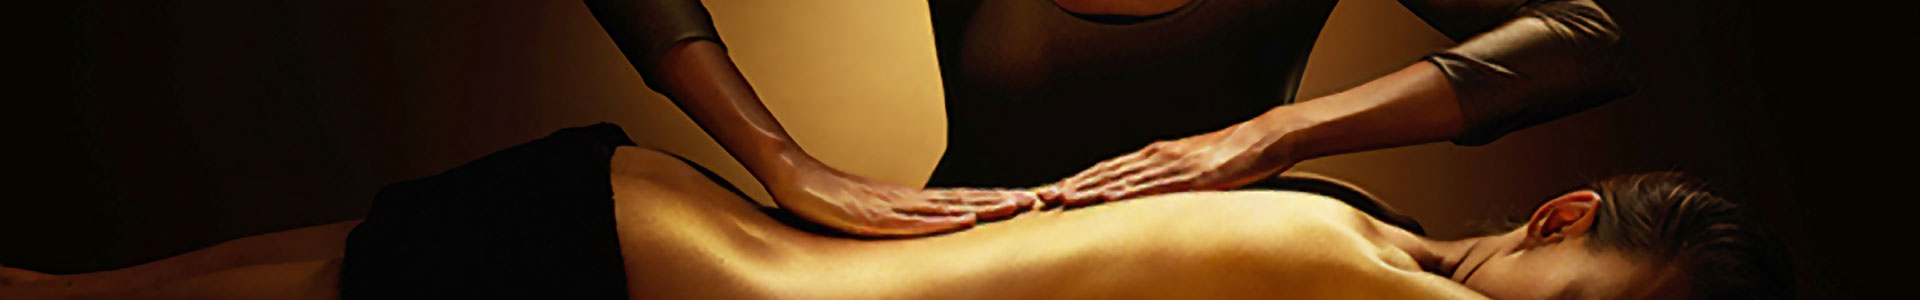 On board wellness & spa center | MSC Yacht Club Massage Rooms | Balinese Spa | Thalassotherapy